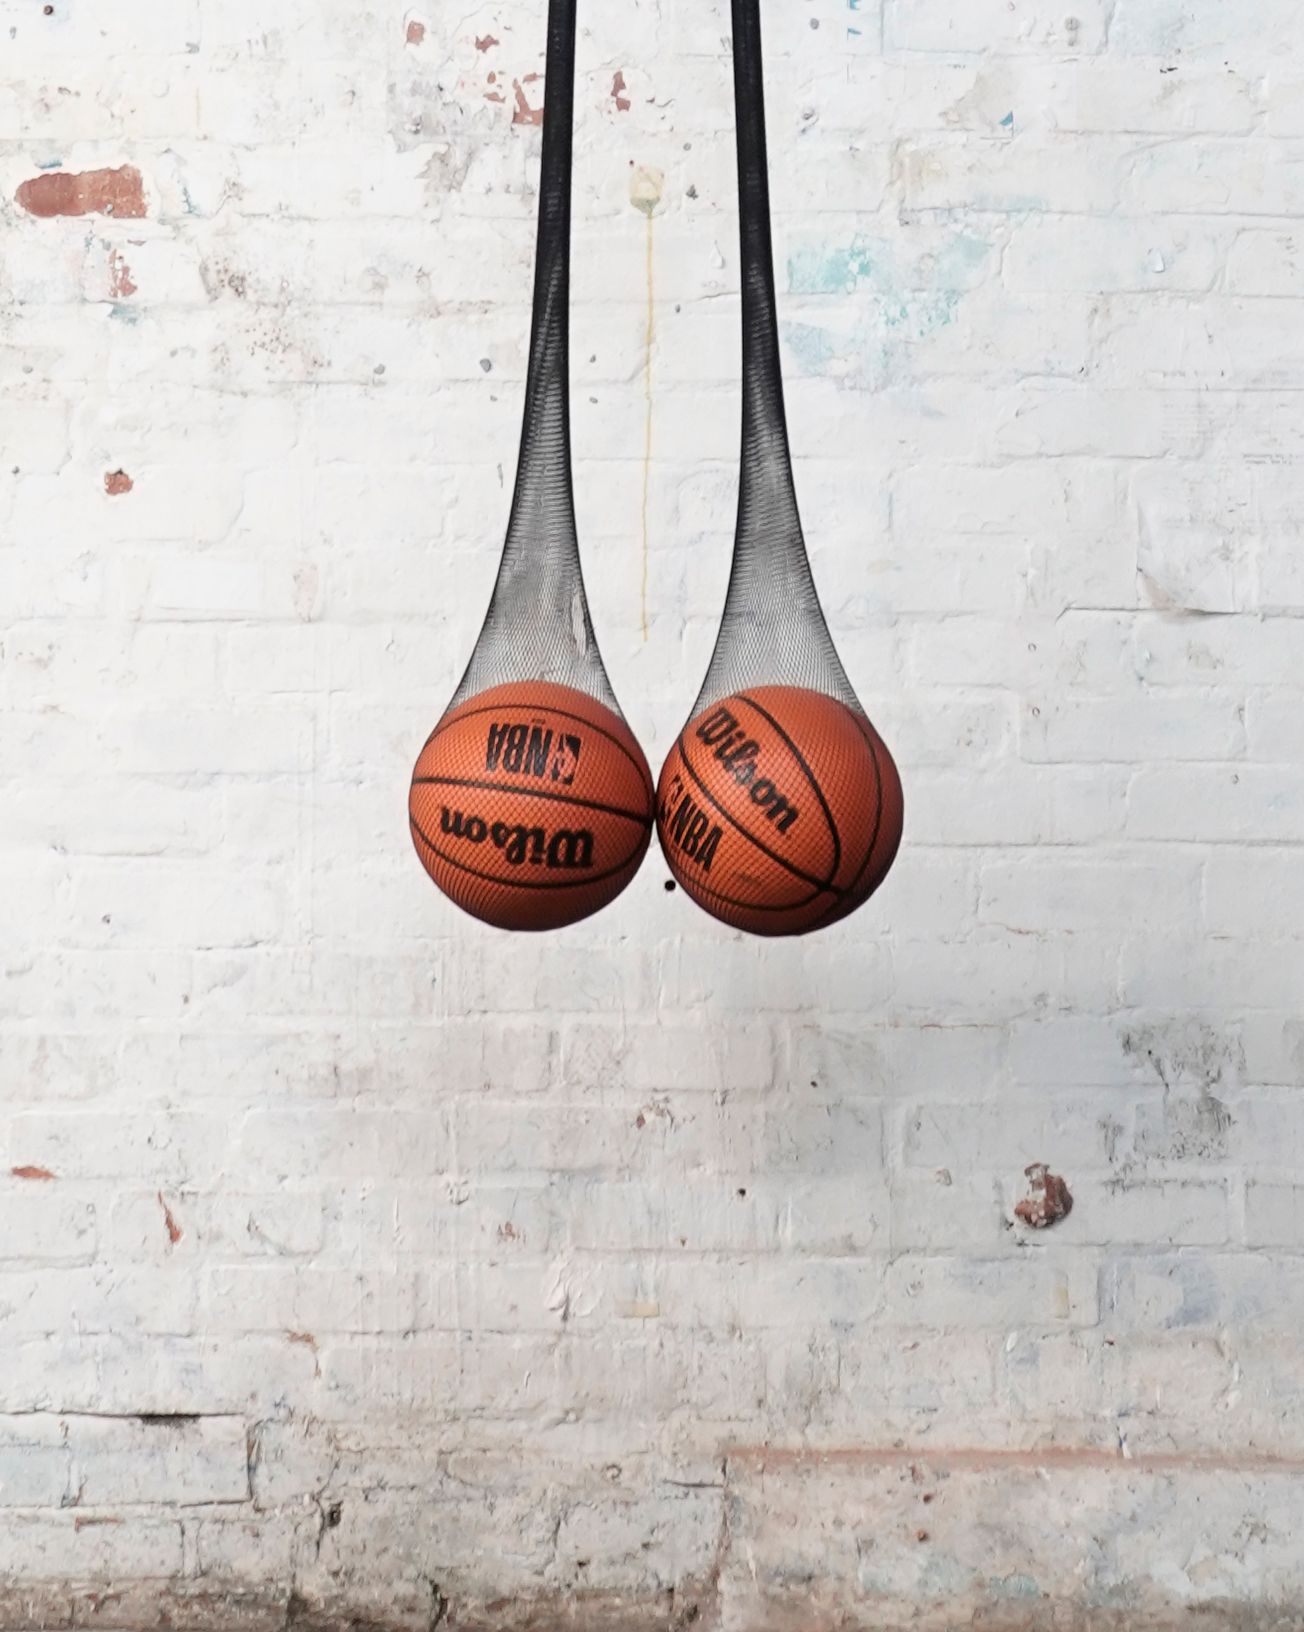 An image of a basketball hoop, the net of which holds two basketballs.